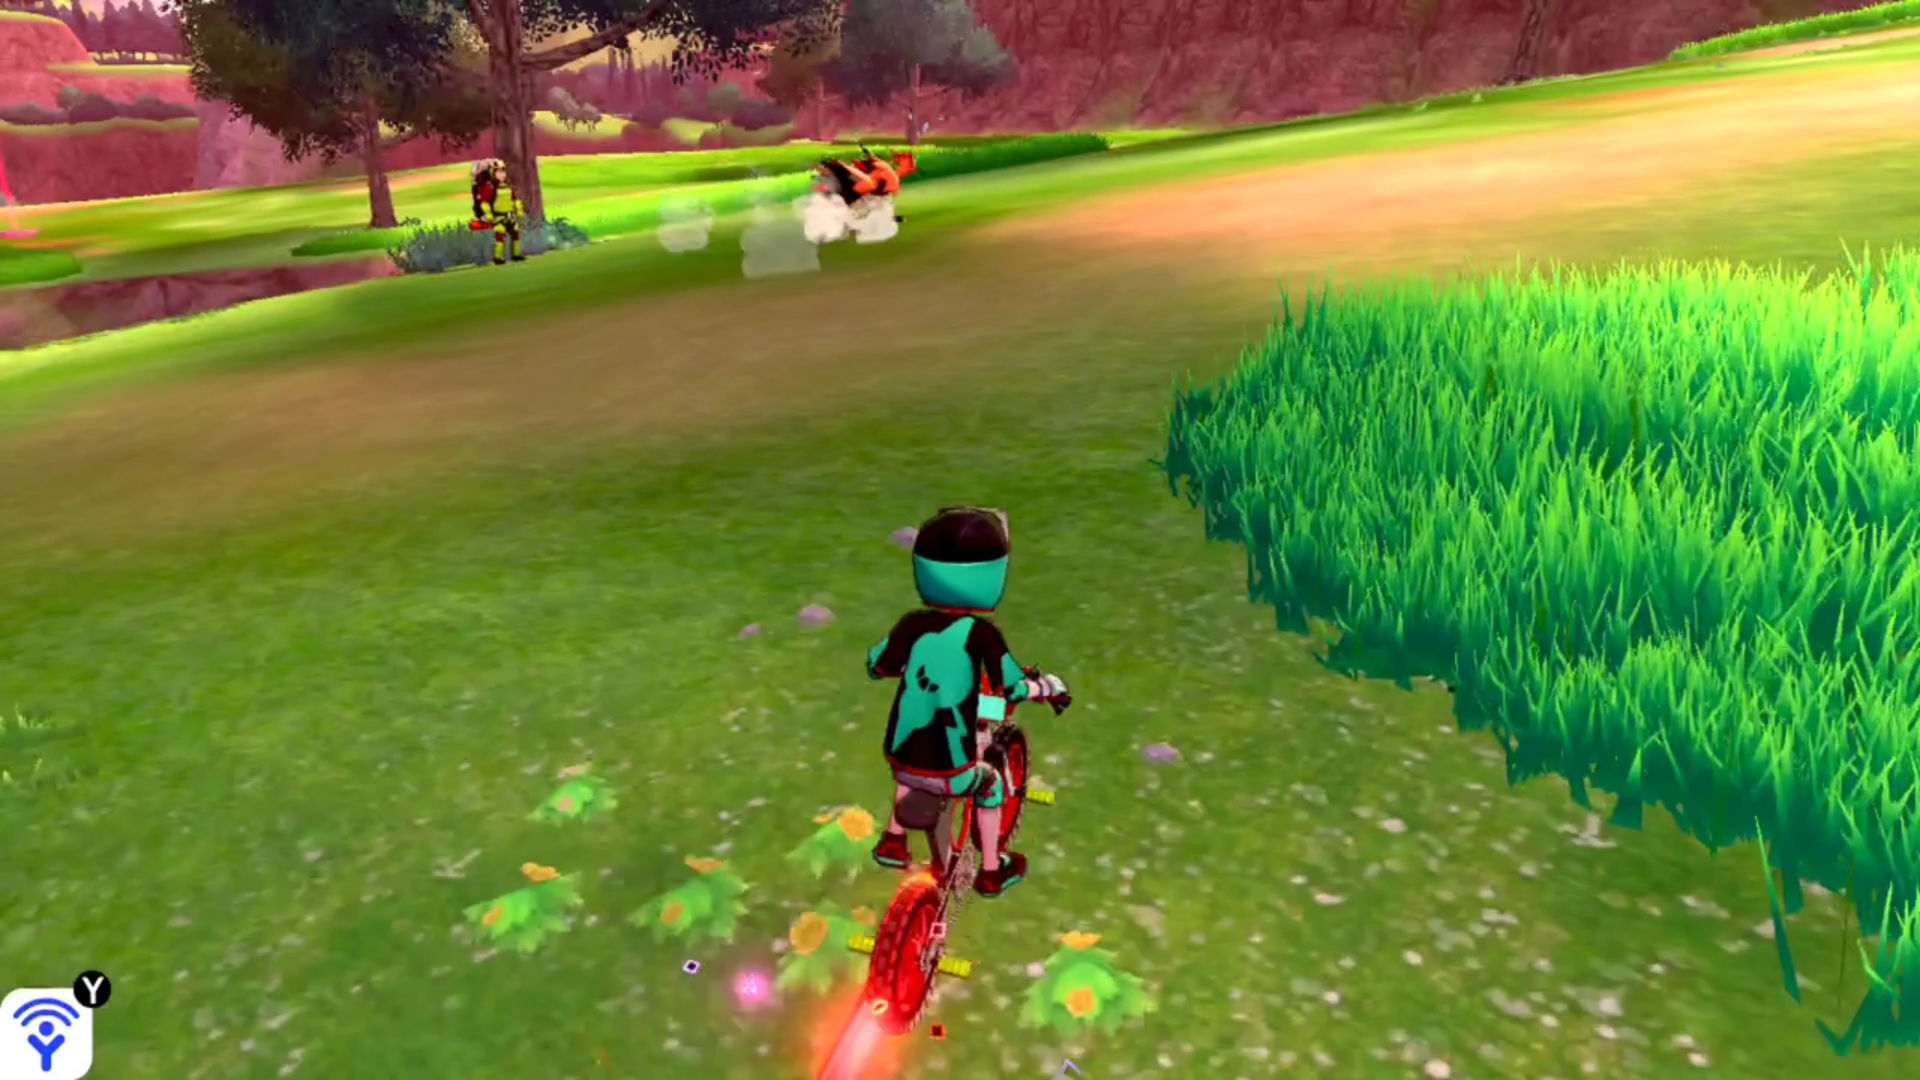 Pokémon Sword and Shield Galarian Zapdos: Galarian Zapdos is running away from the trainer, who is riding a bike, in the Wild Area. It has sweat marks above its head, which indicates that it's getting tired.